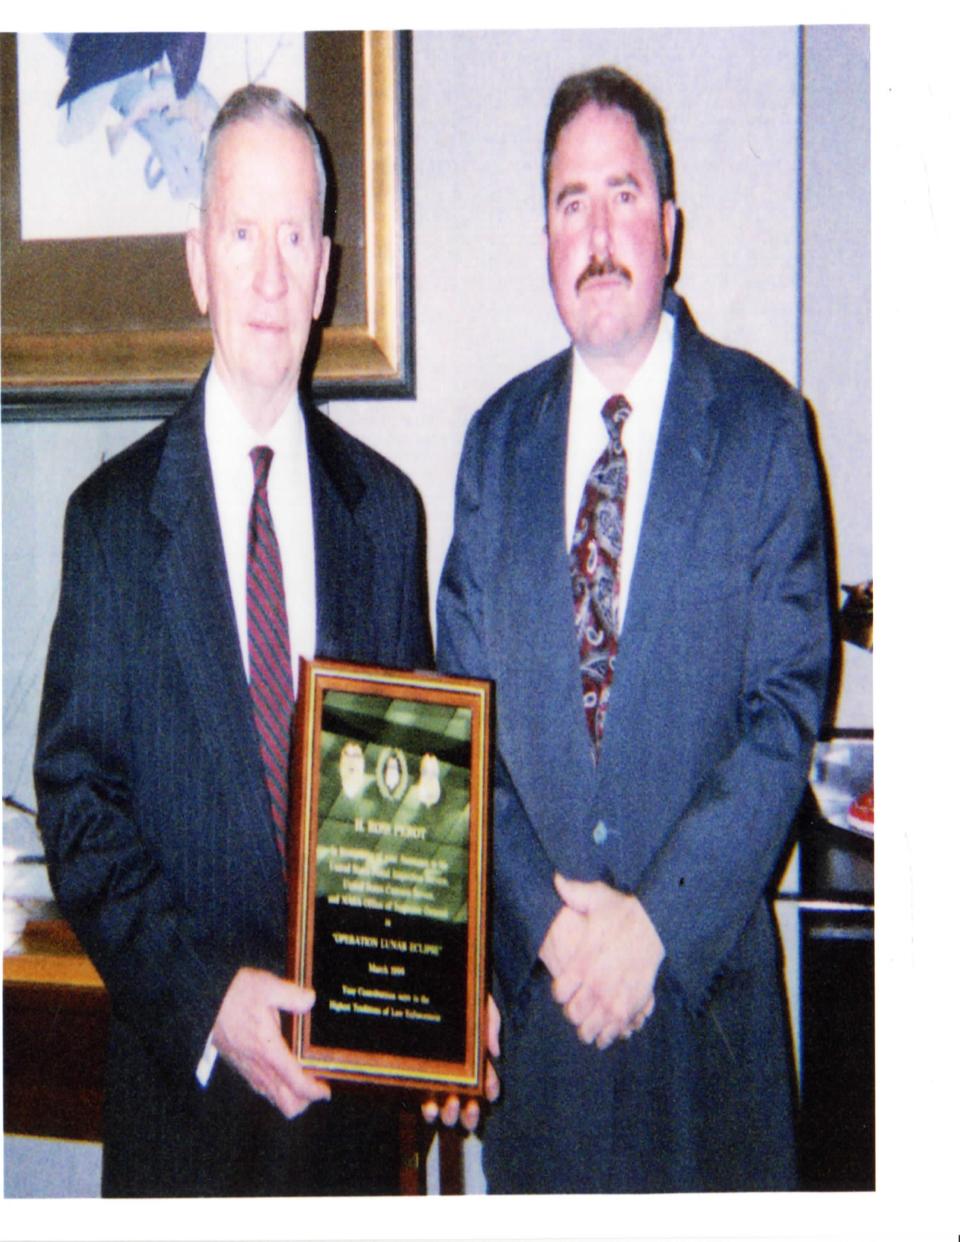 Joseph Gutheinz (right) presenting H. Ross Perot a plaque thanking him with helping NASA's "Operation Lunar Eclipse."